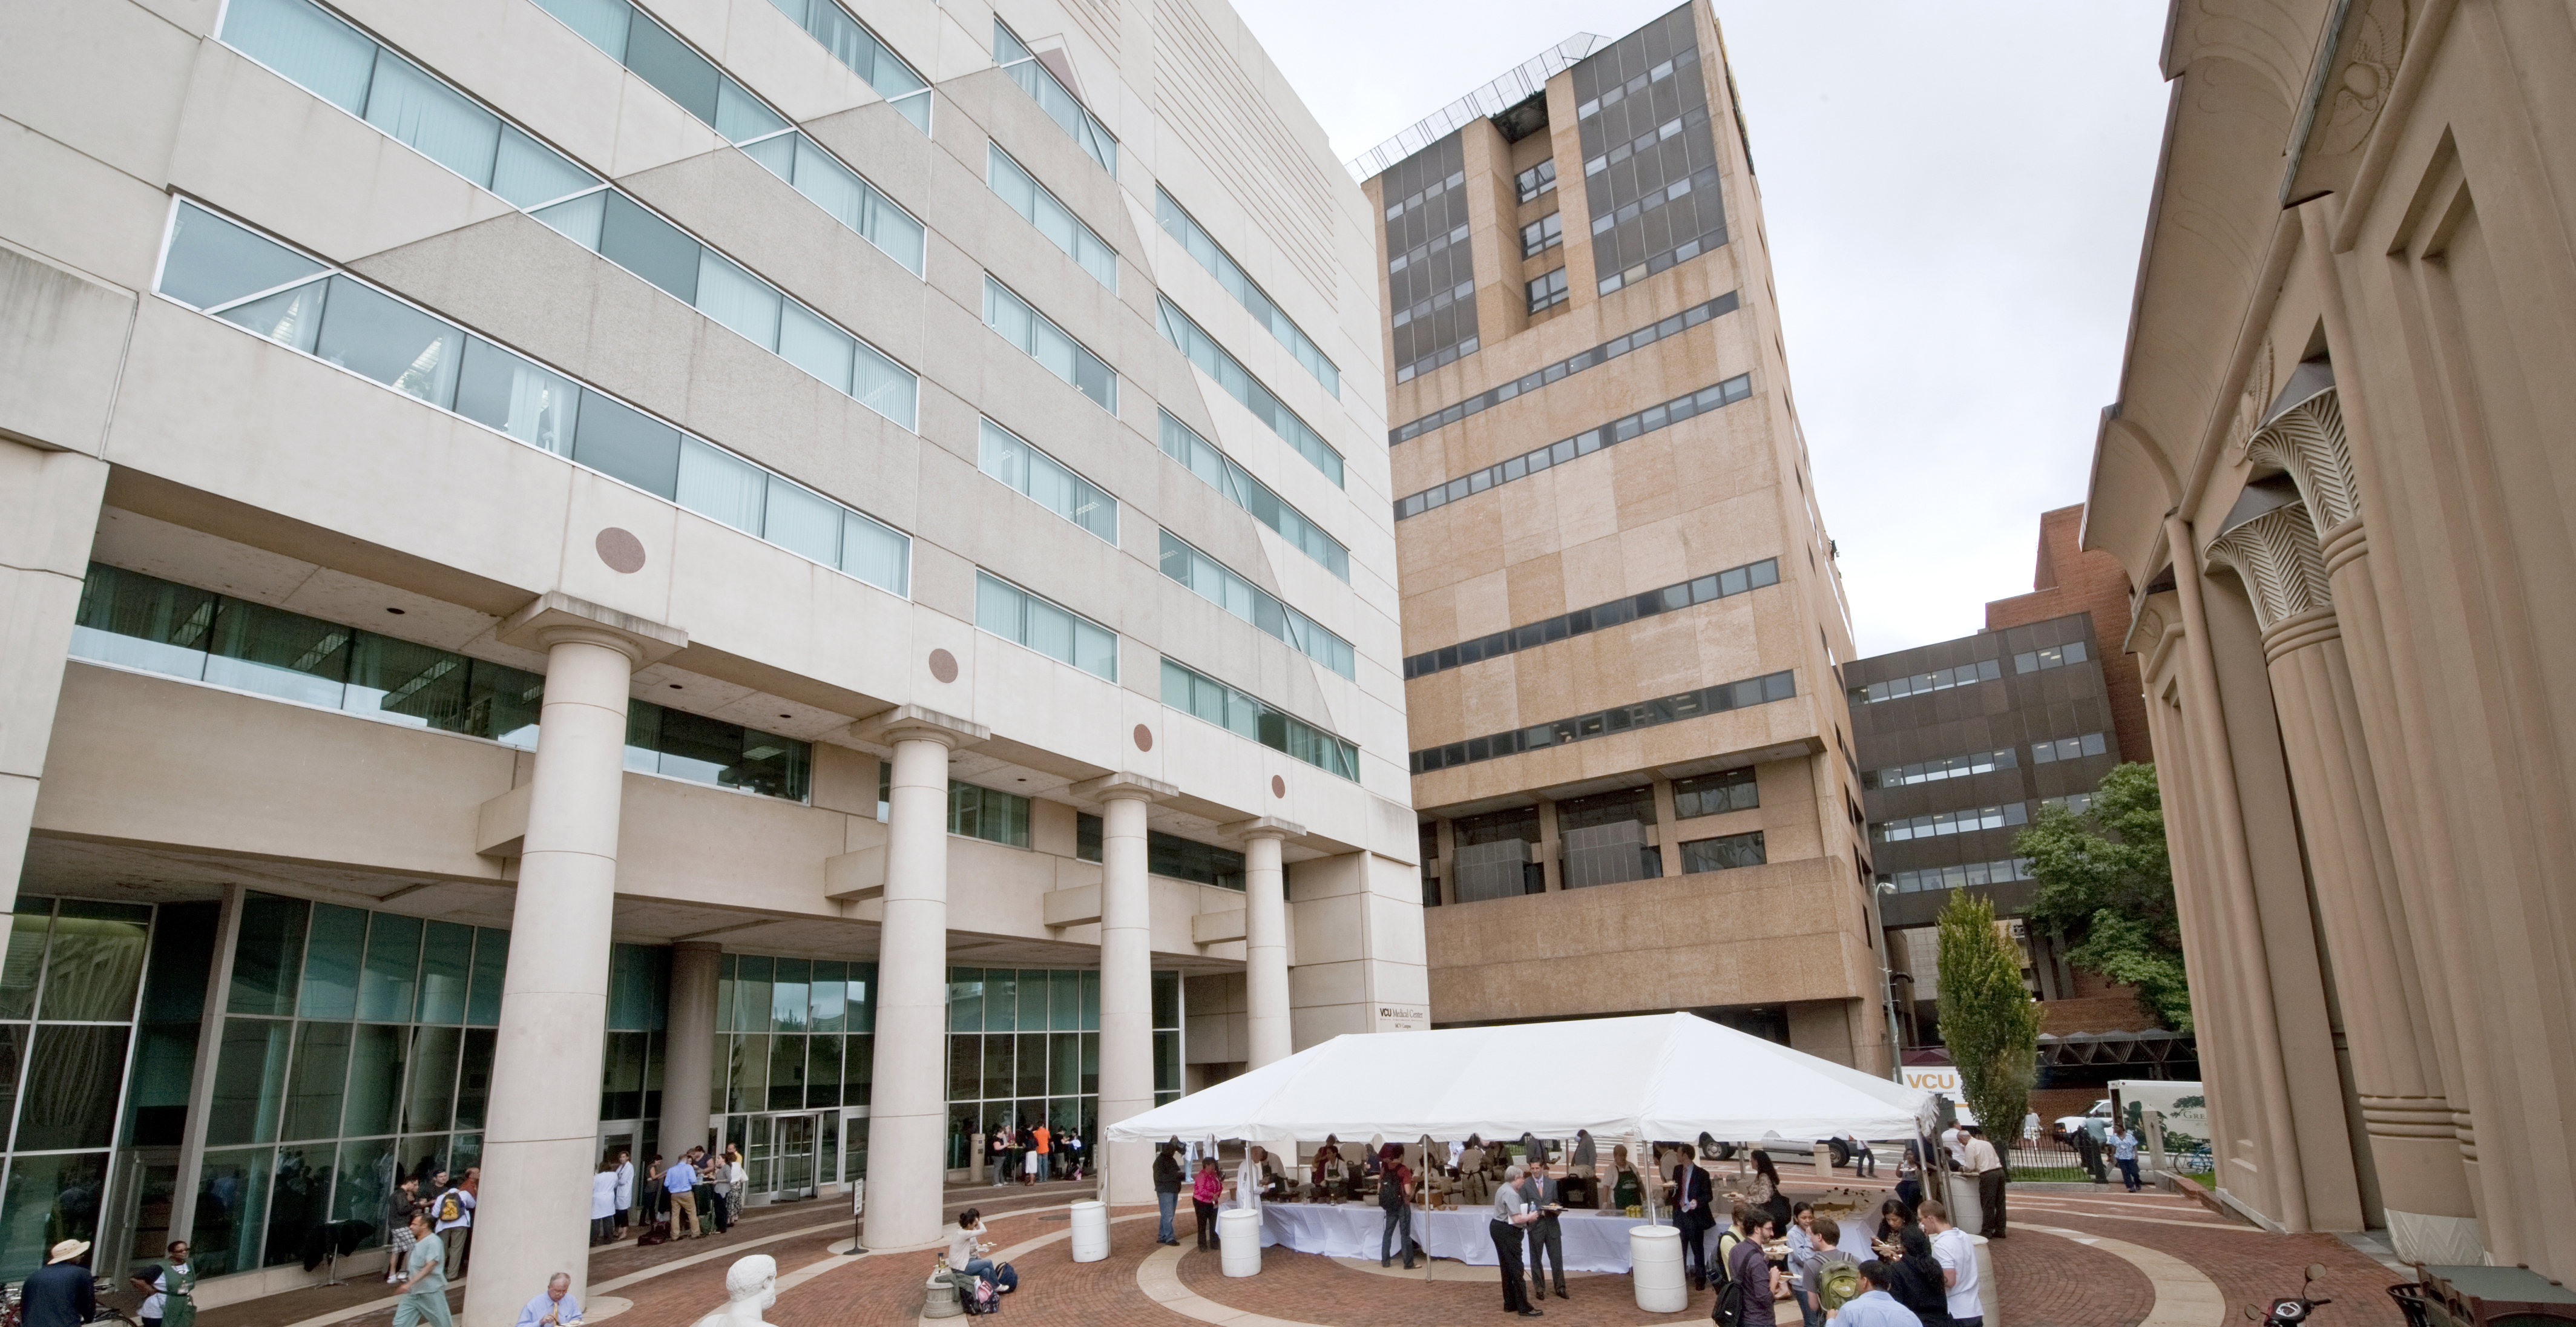 Students and faculty enjoy food outside of iconic MCV campus buildings